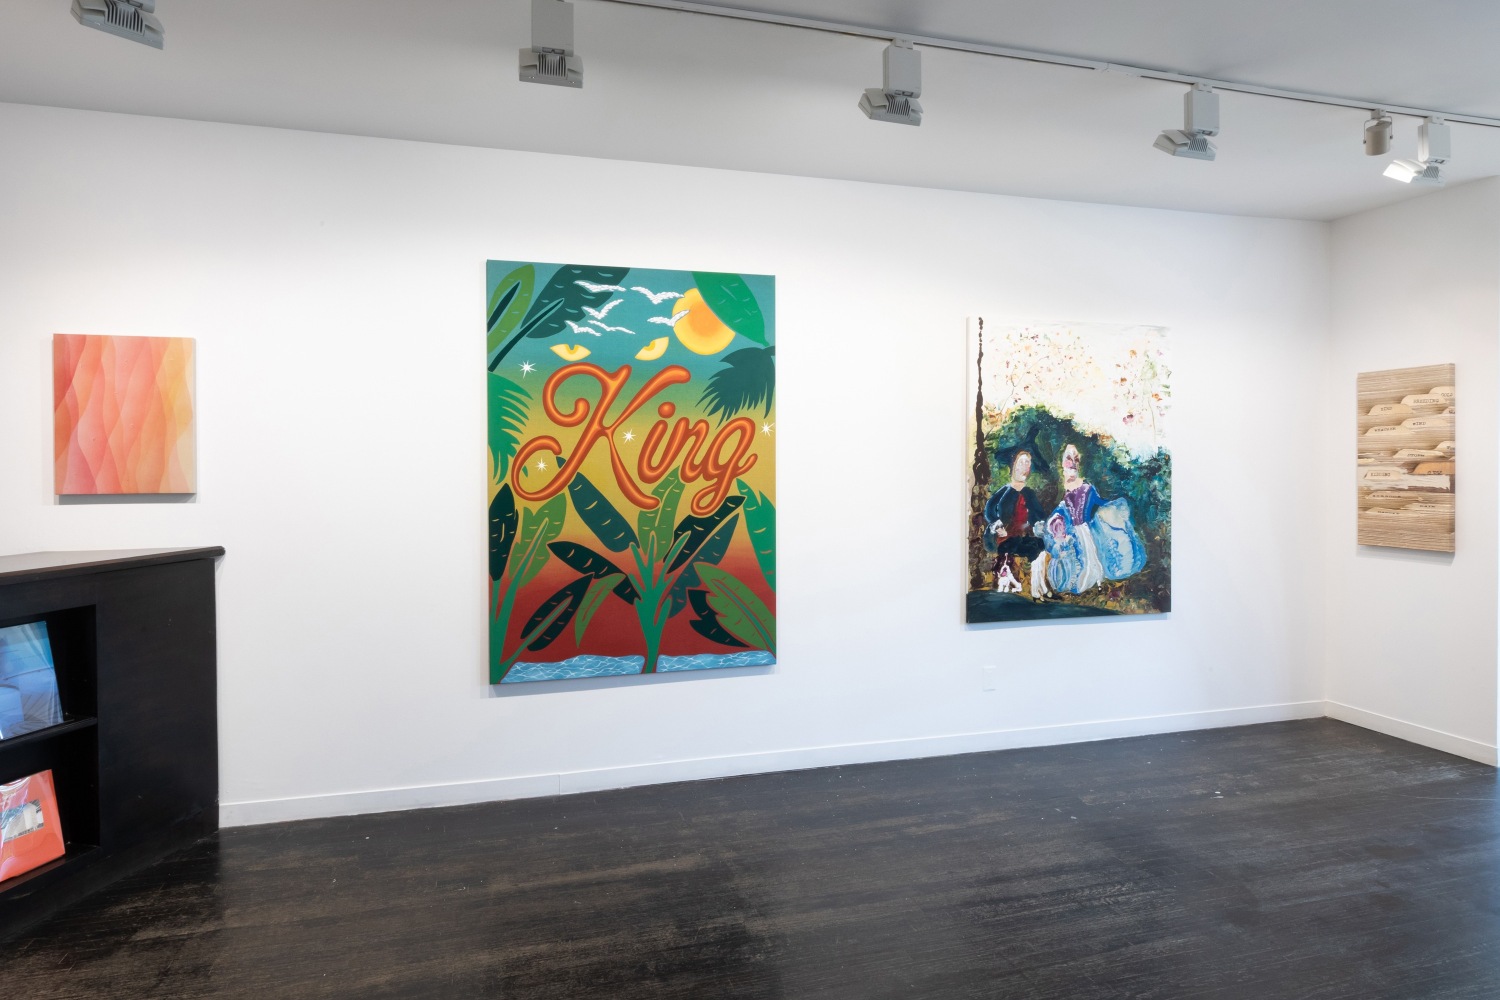 25 Years - installation view